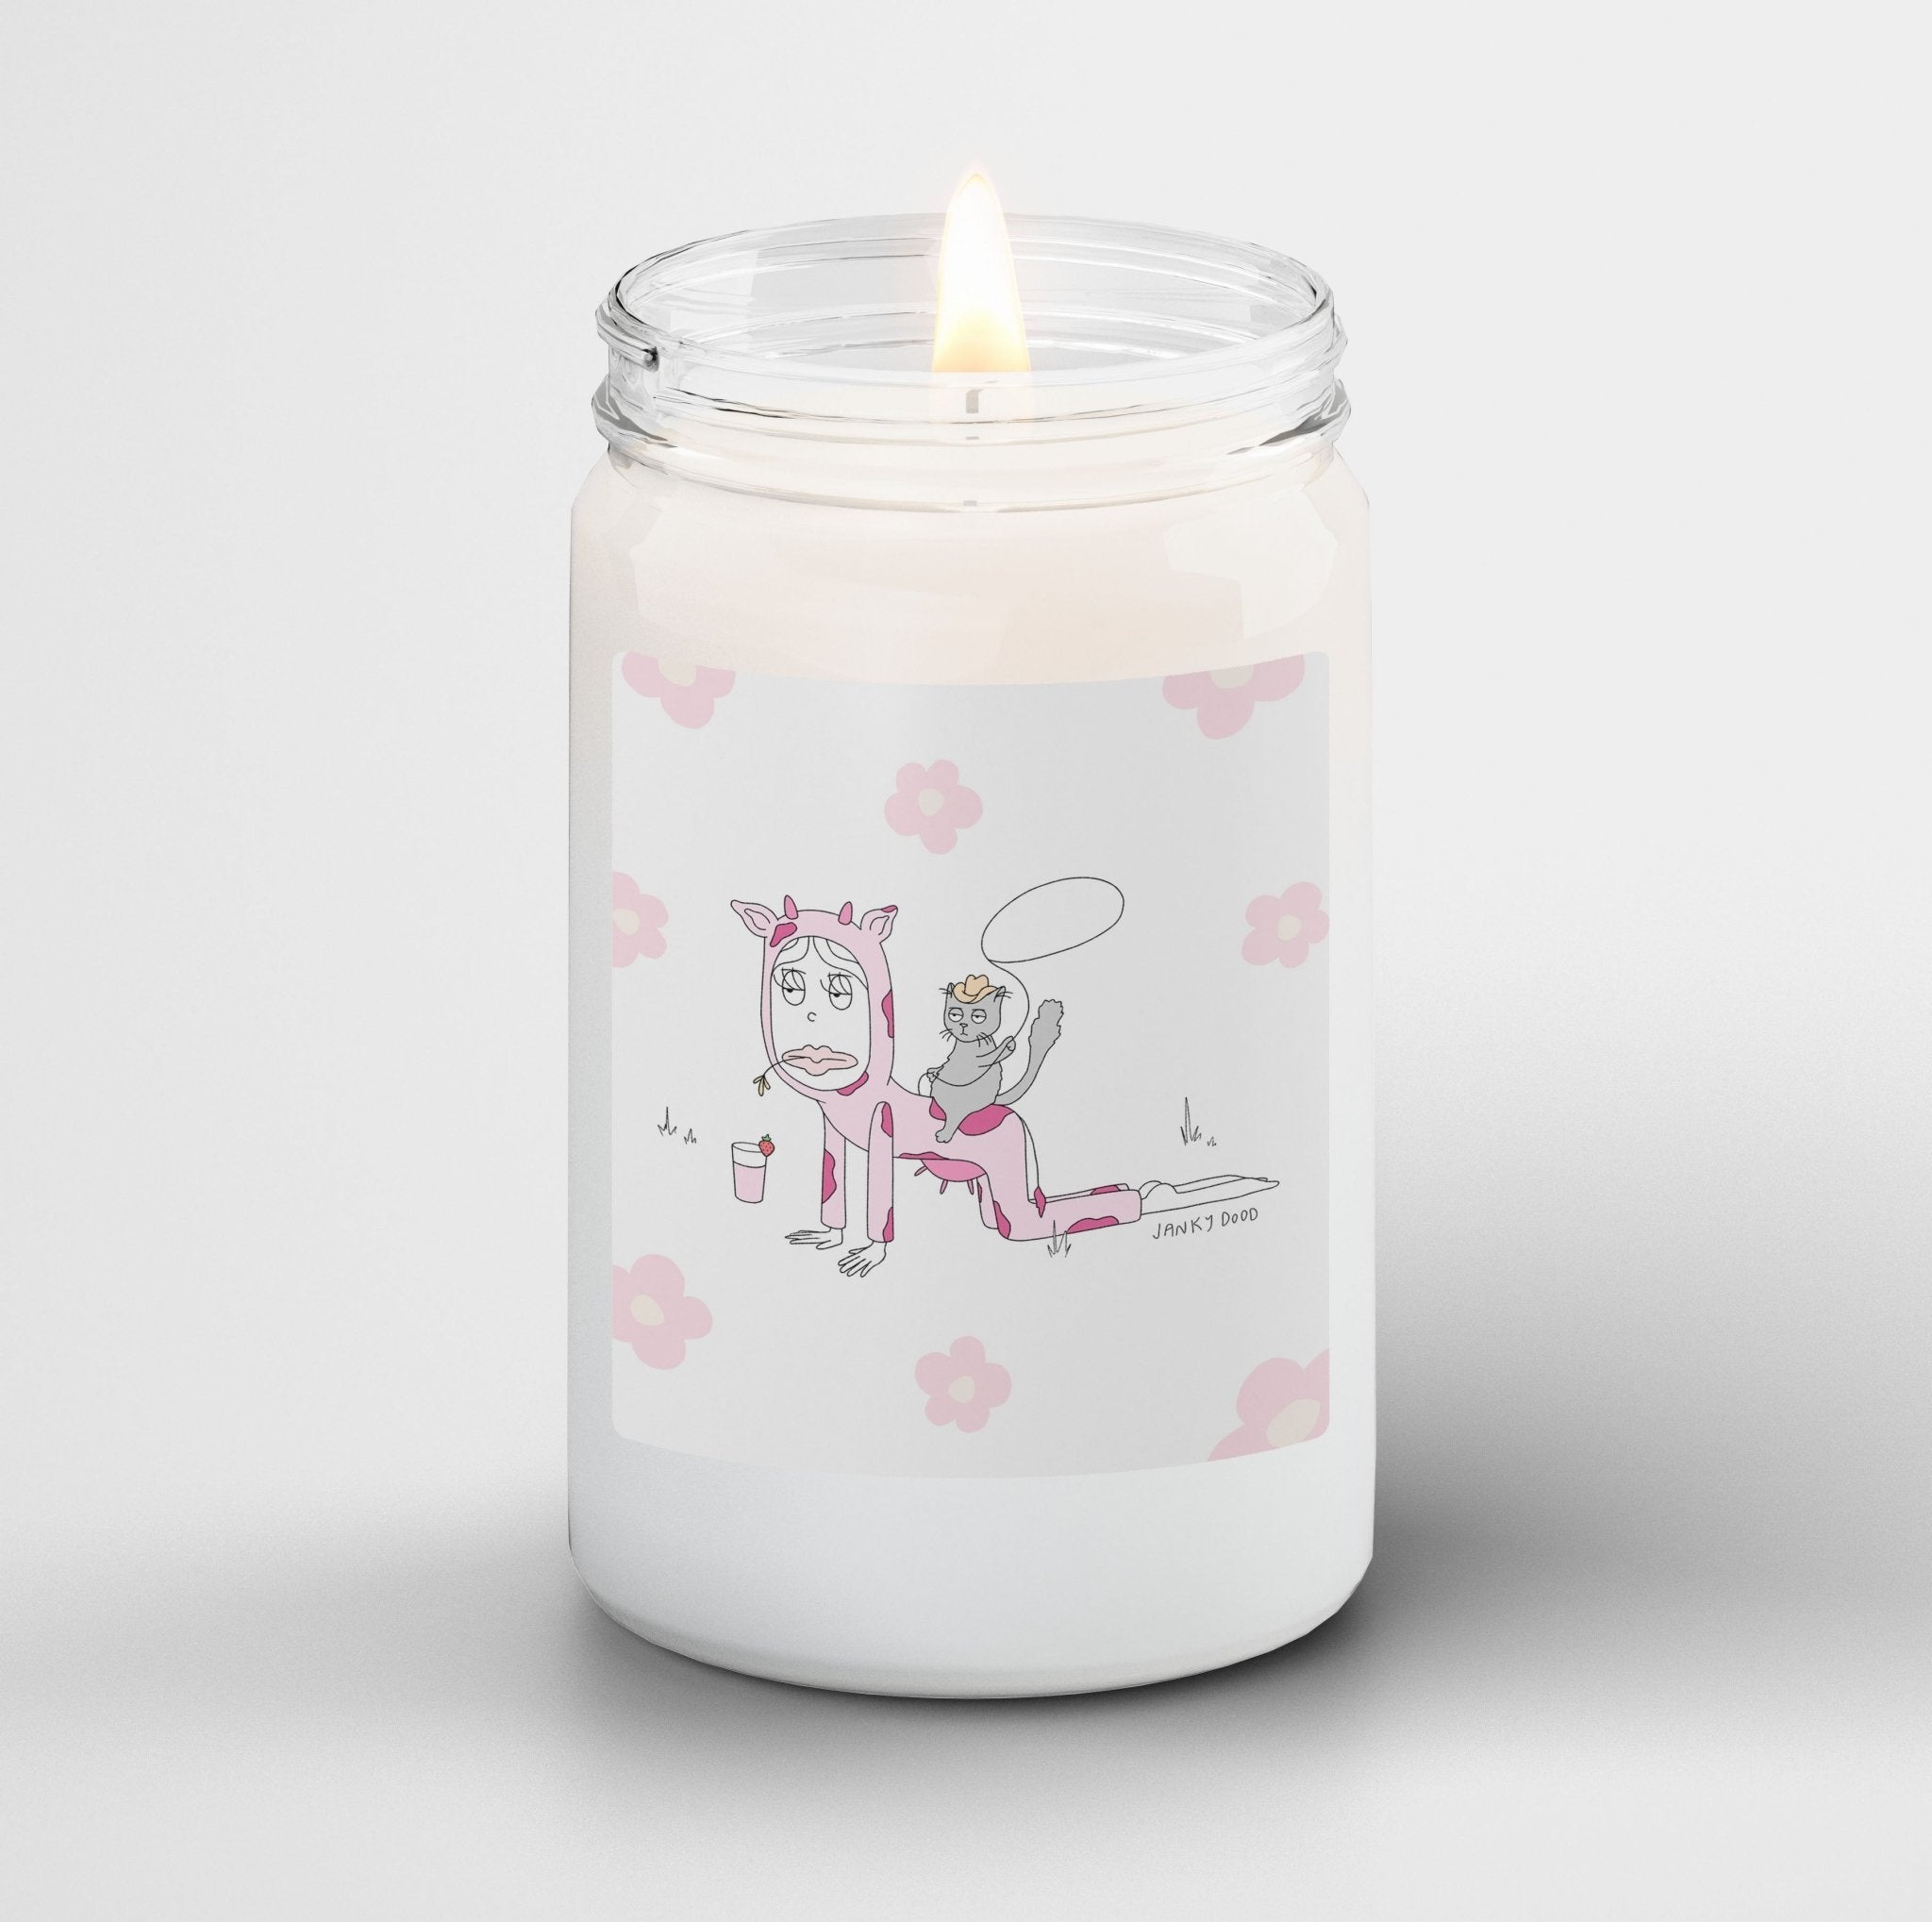 Janky Dood Scented Candle in Mason Jar: Strawberry Cowboy - Candlefy